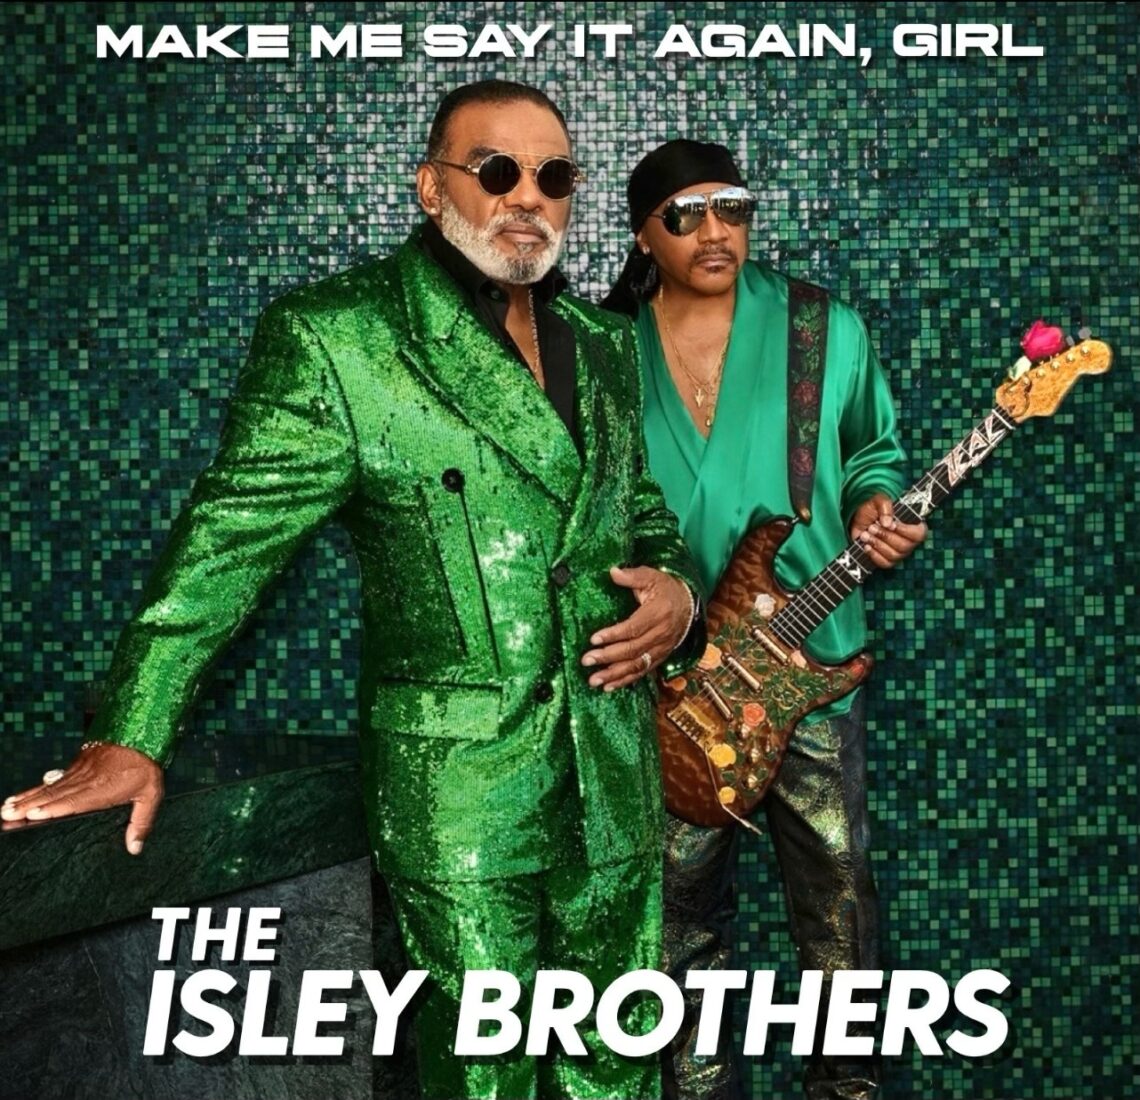 The Isley Brothers Share New Album 'Make Me Say It Again, Girl' Rated R&B